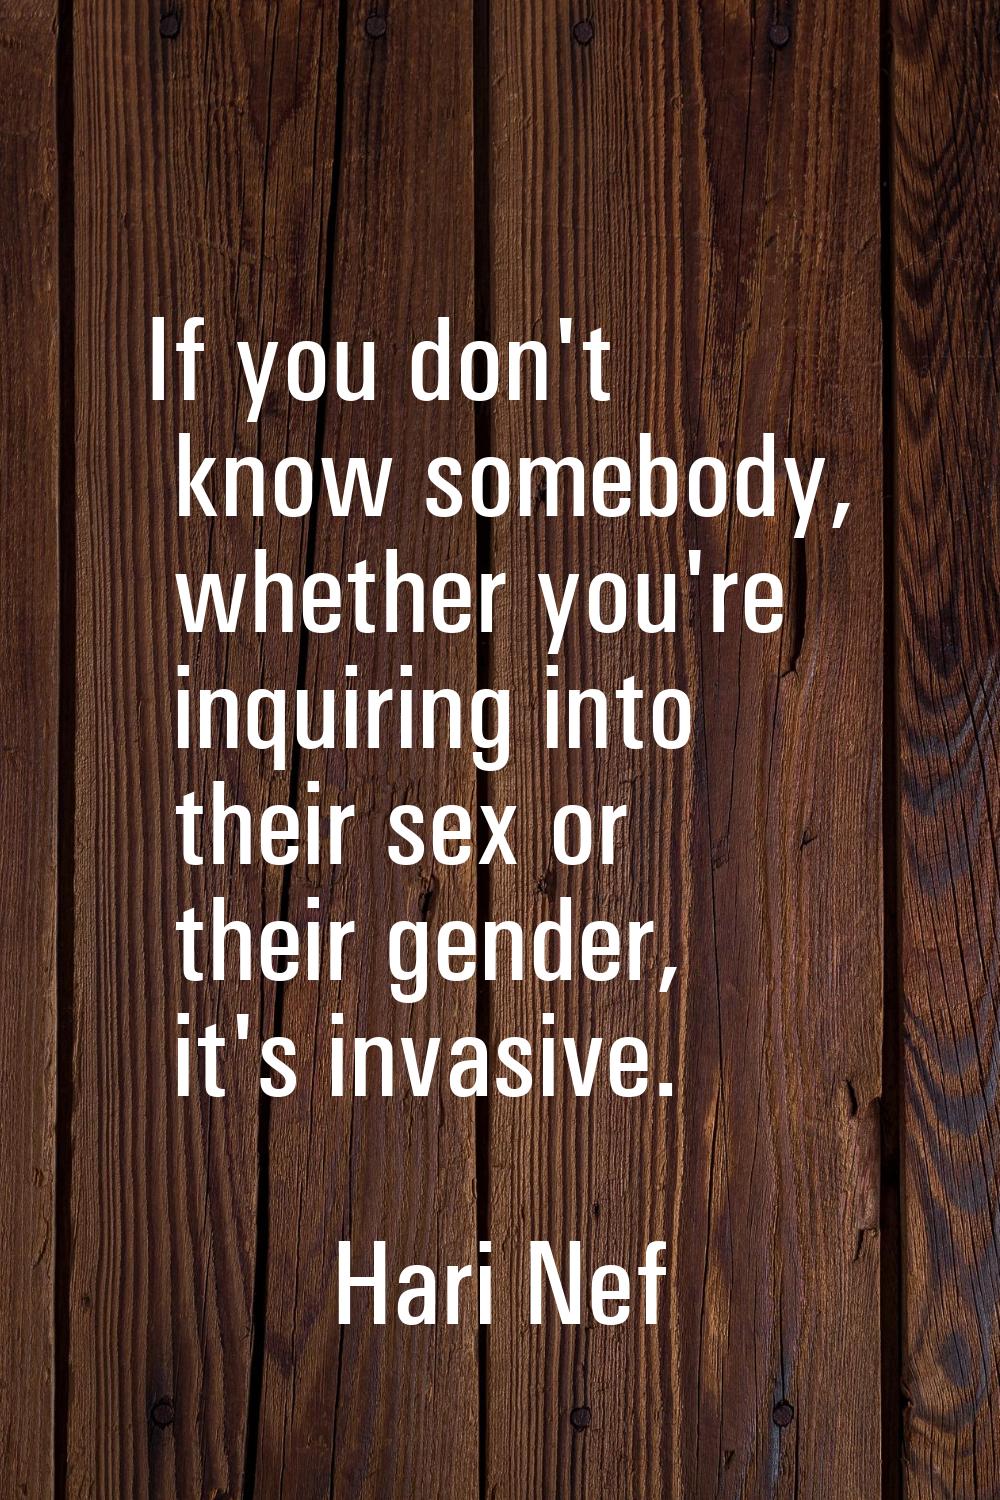 If you don't know somebody, whether you're inquiring into their sex or their gender, it's invasive.